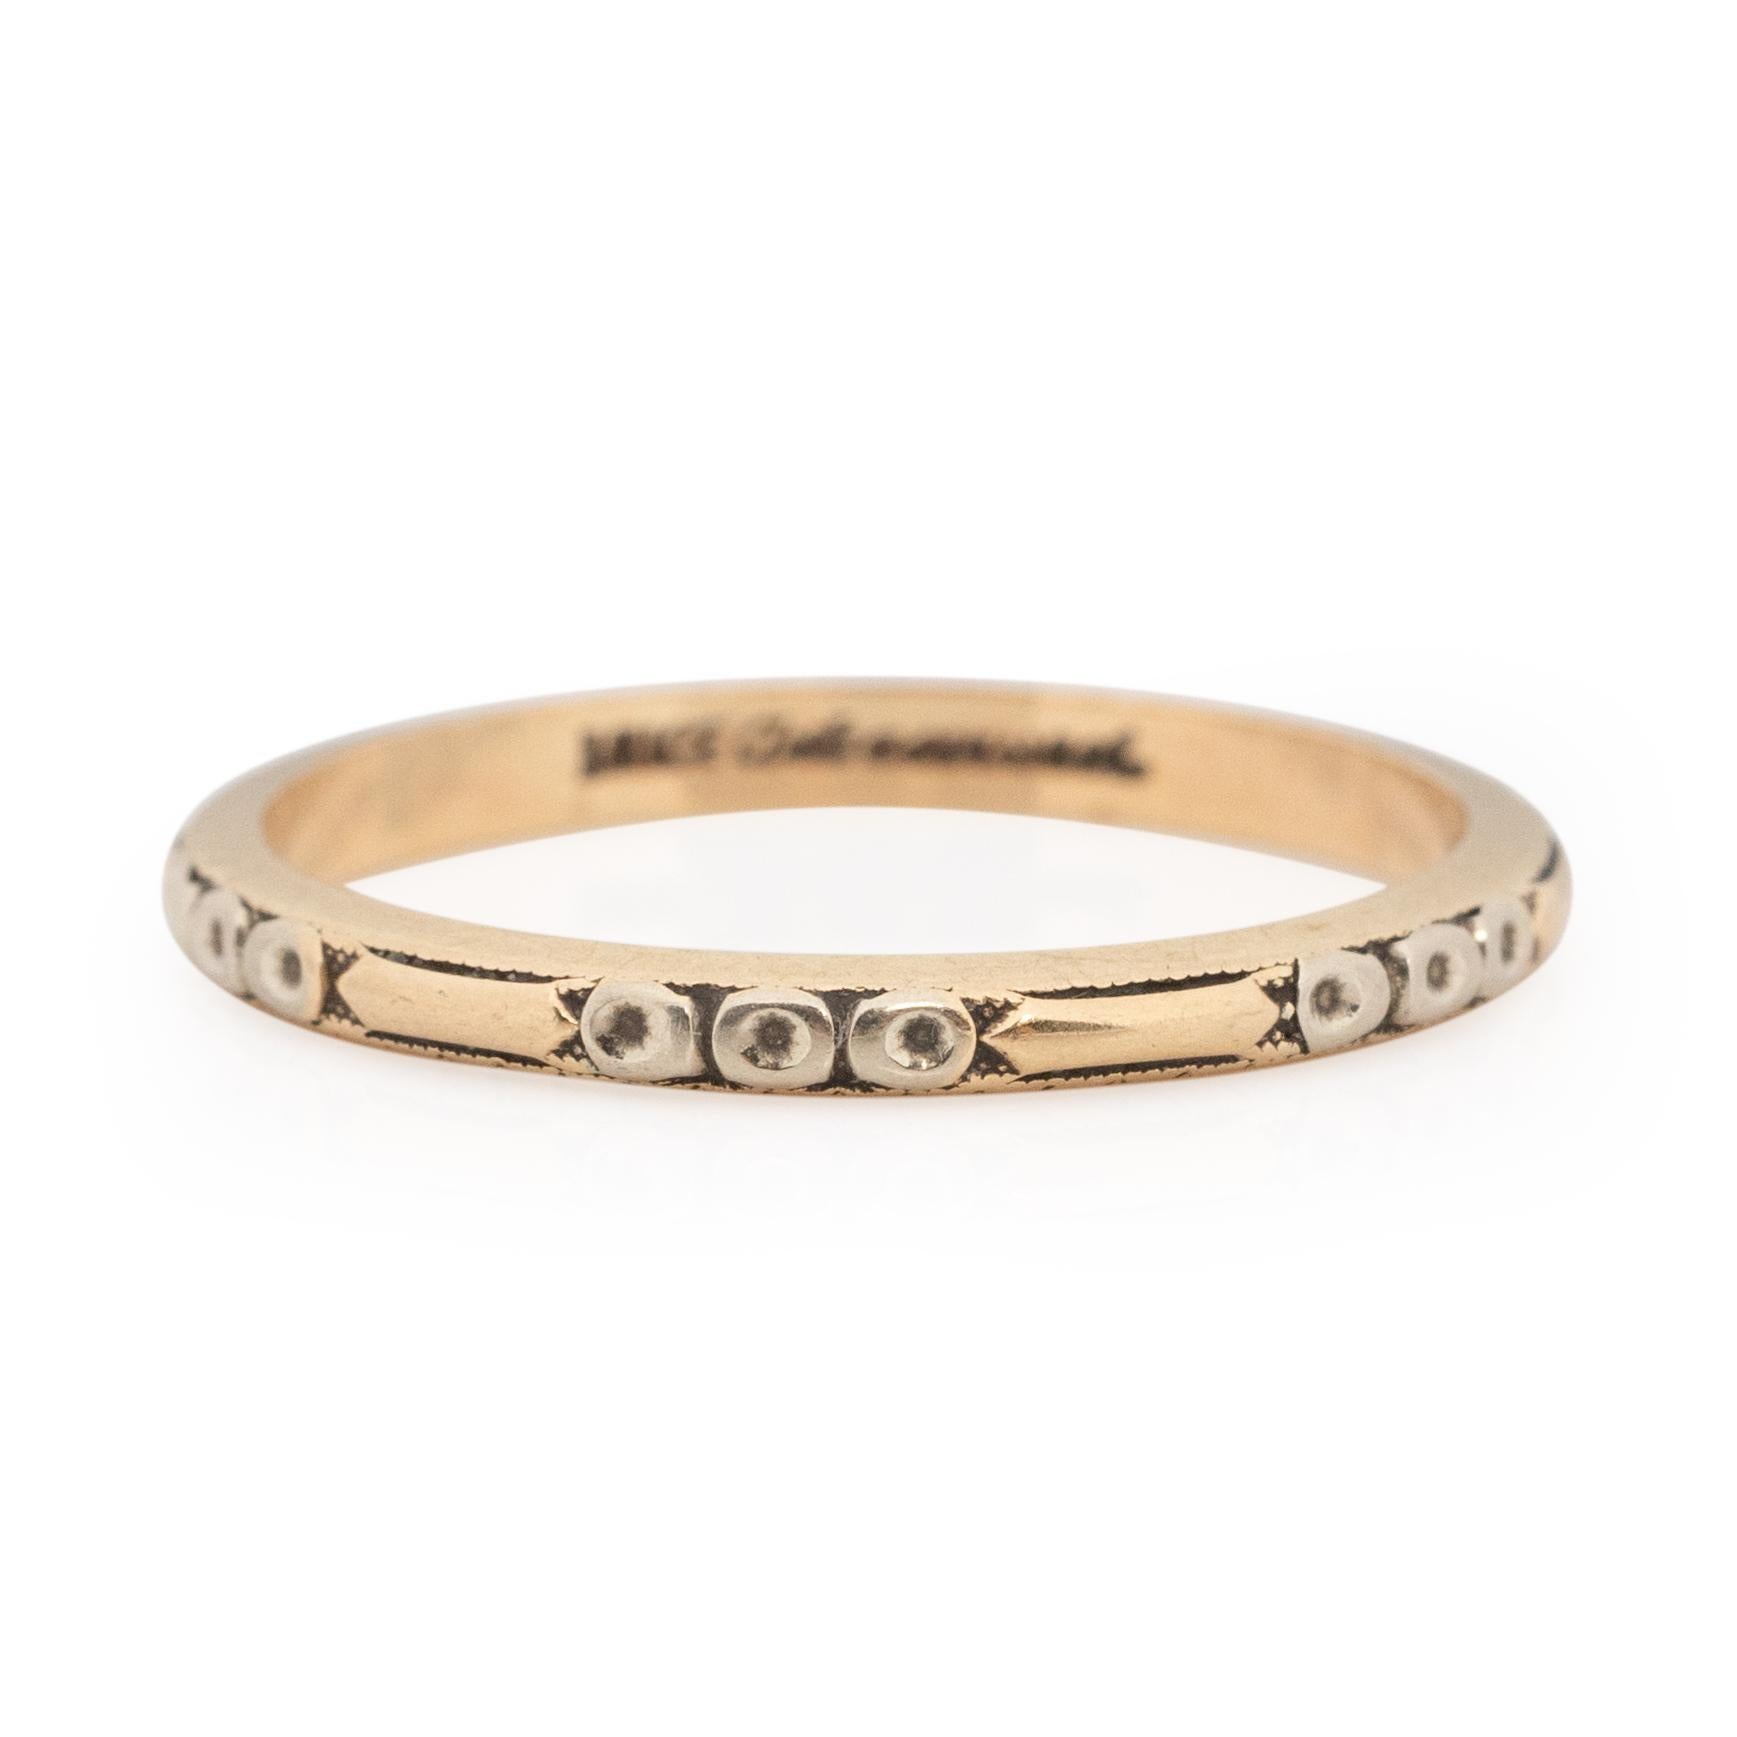 This art deco piece is in outstanding condition for its age. Crafted in 14k gold, the rings base is yellow gold. The repeating circle and line design has a pop of white gold in the circle part of the design. This thin band is beautifully made, the